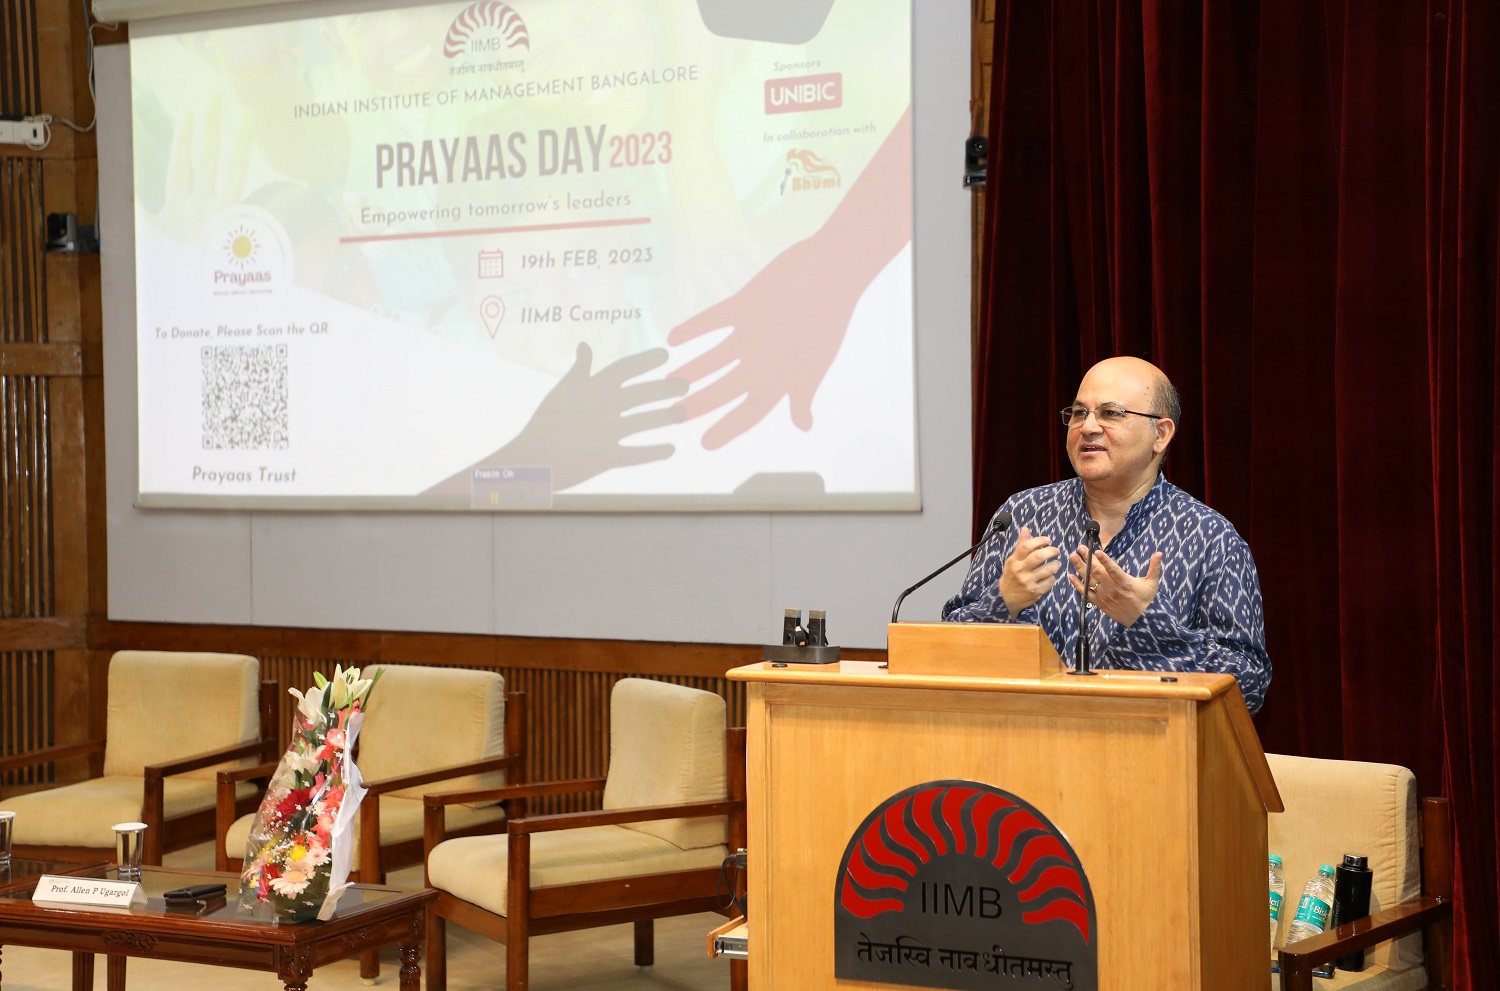 Prof. Rishikesha T Krishnan, Director, IIM Bangalore, speaks at Prayaas Day on 19th February 2023, hosted by the students of EPGP and PGPEM. Prayaas is the social responsibility initiative of EPGP, which is aligned to IIMB’s ethos of building socially responsible leaders.